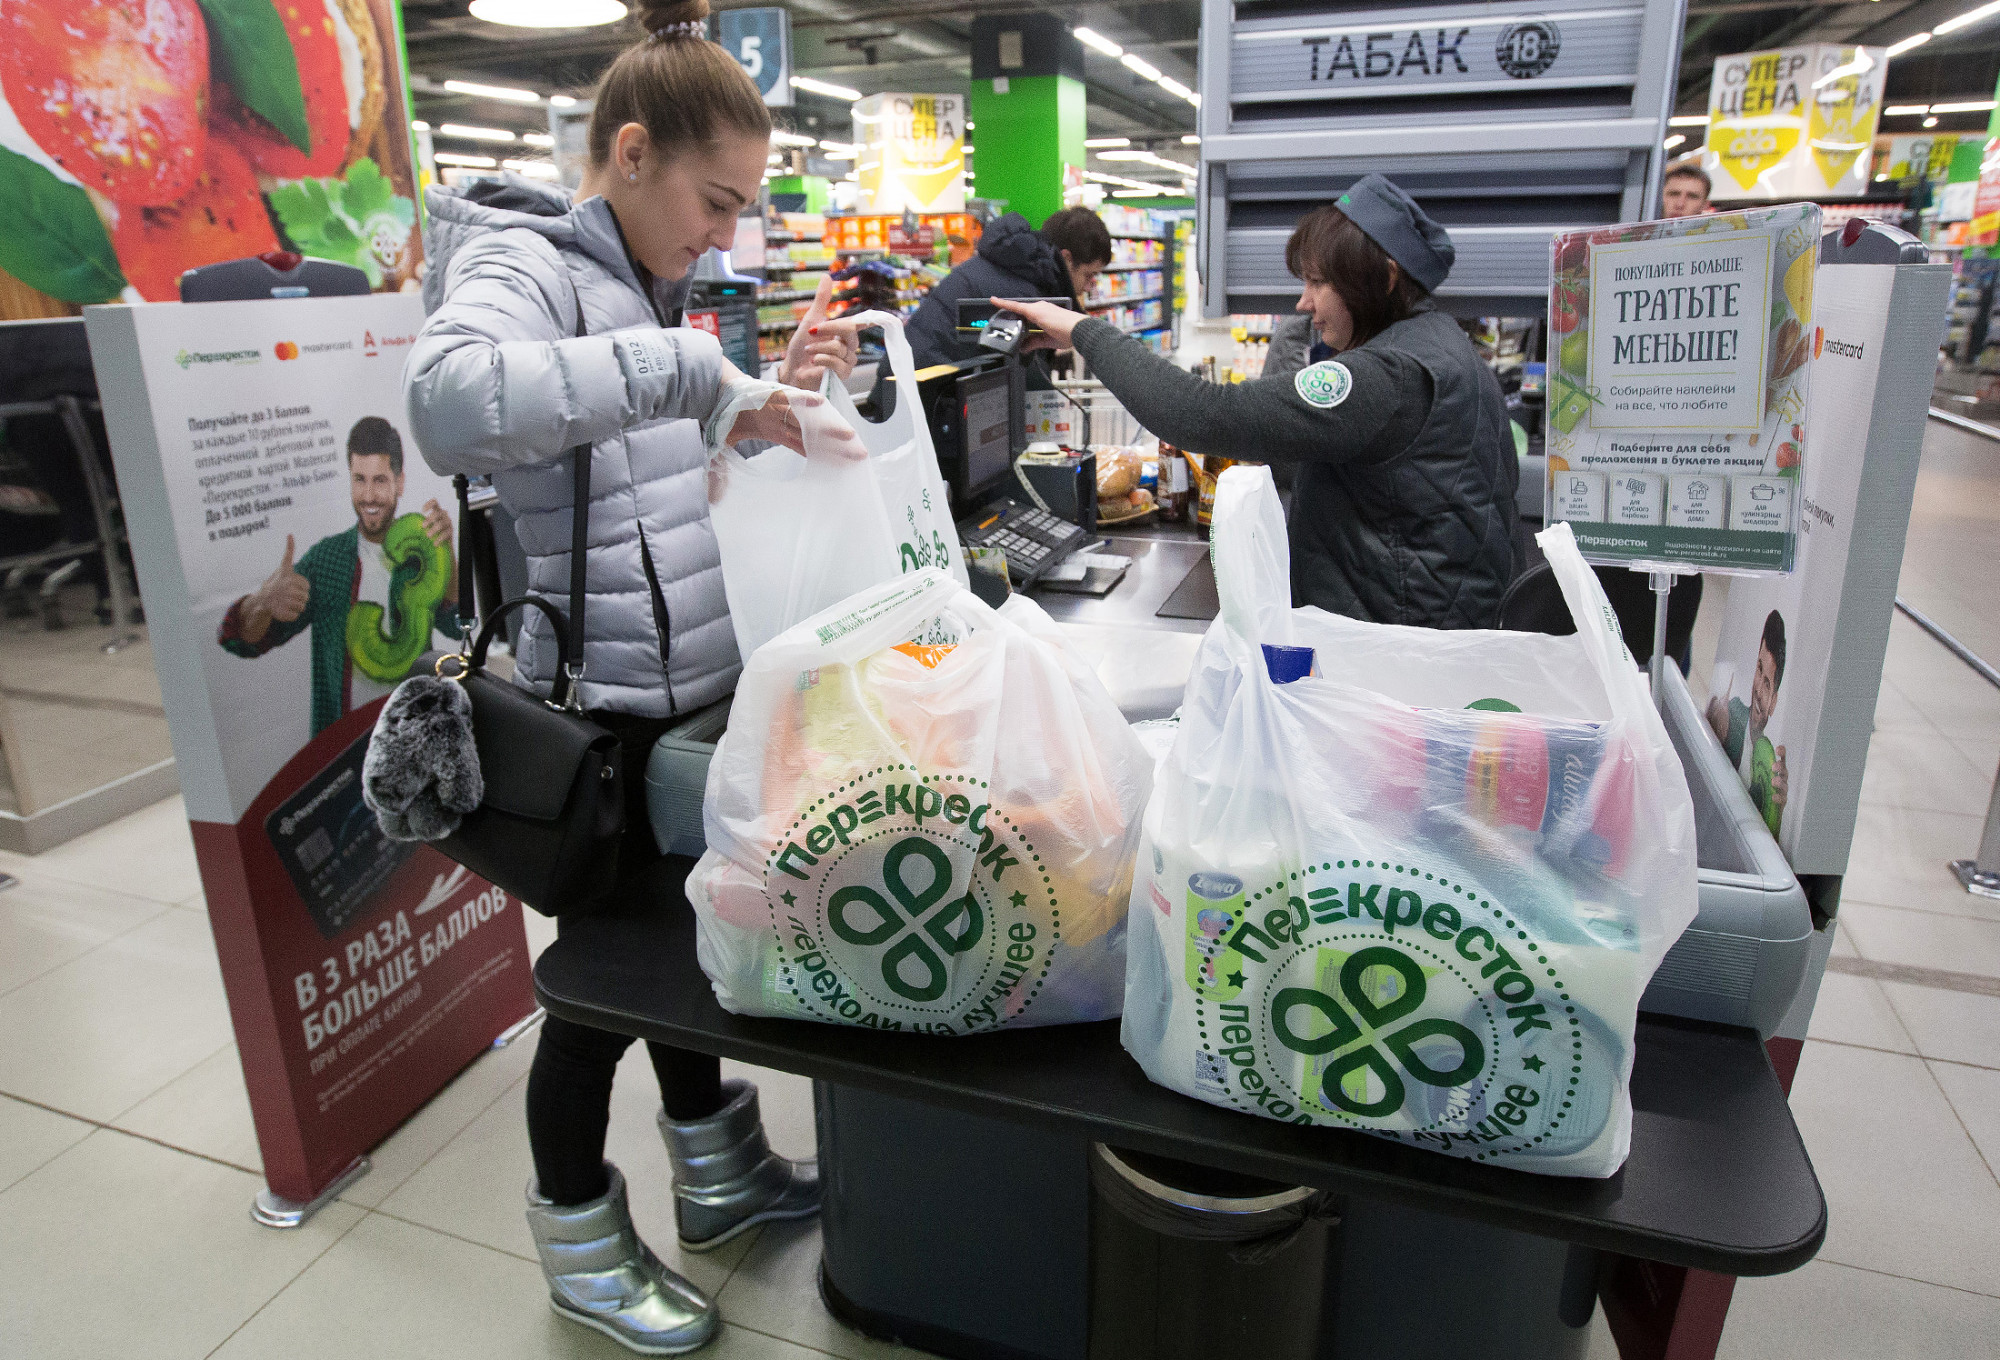 Once indispensable for the country’s prospects, consumption flat-lined well below zero throughout last year even as the broader economy defied gloom. From the ruble to industrial output and wages, Russia is on the up and up.
